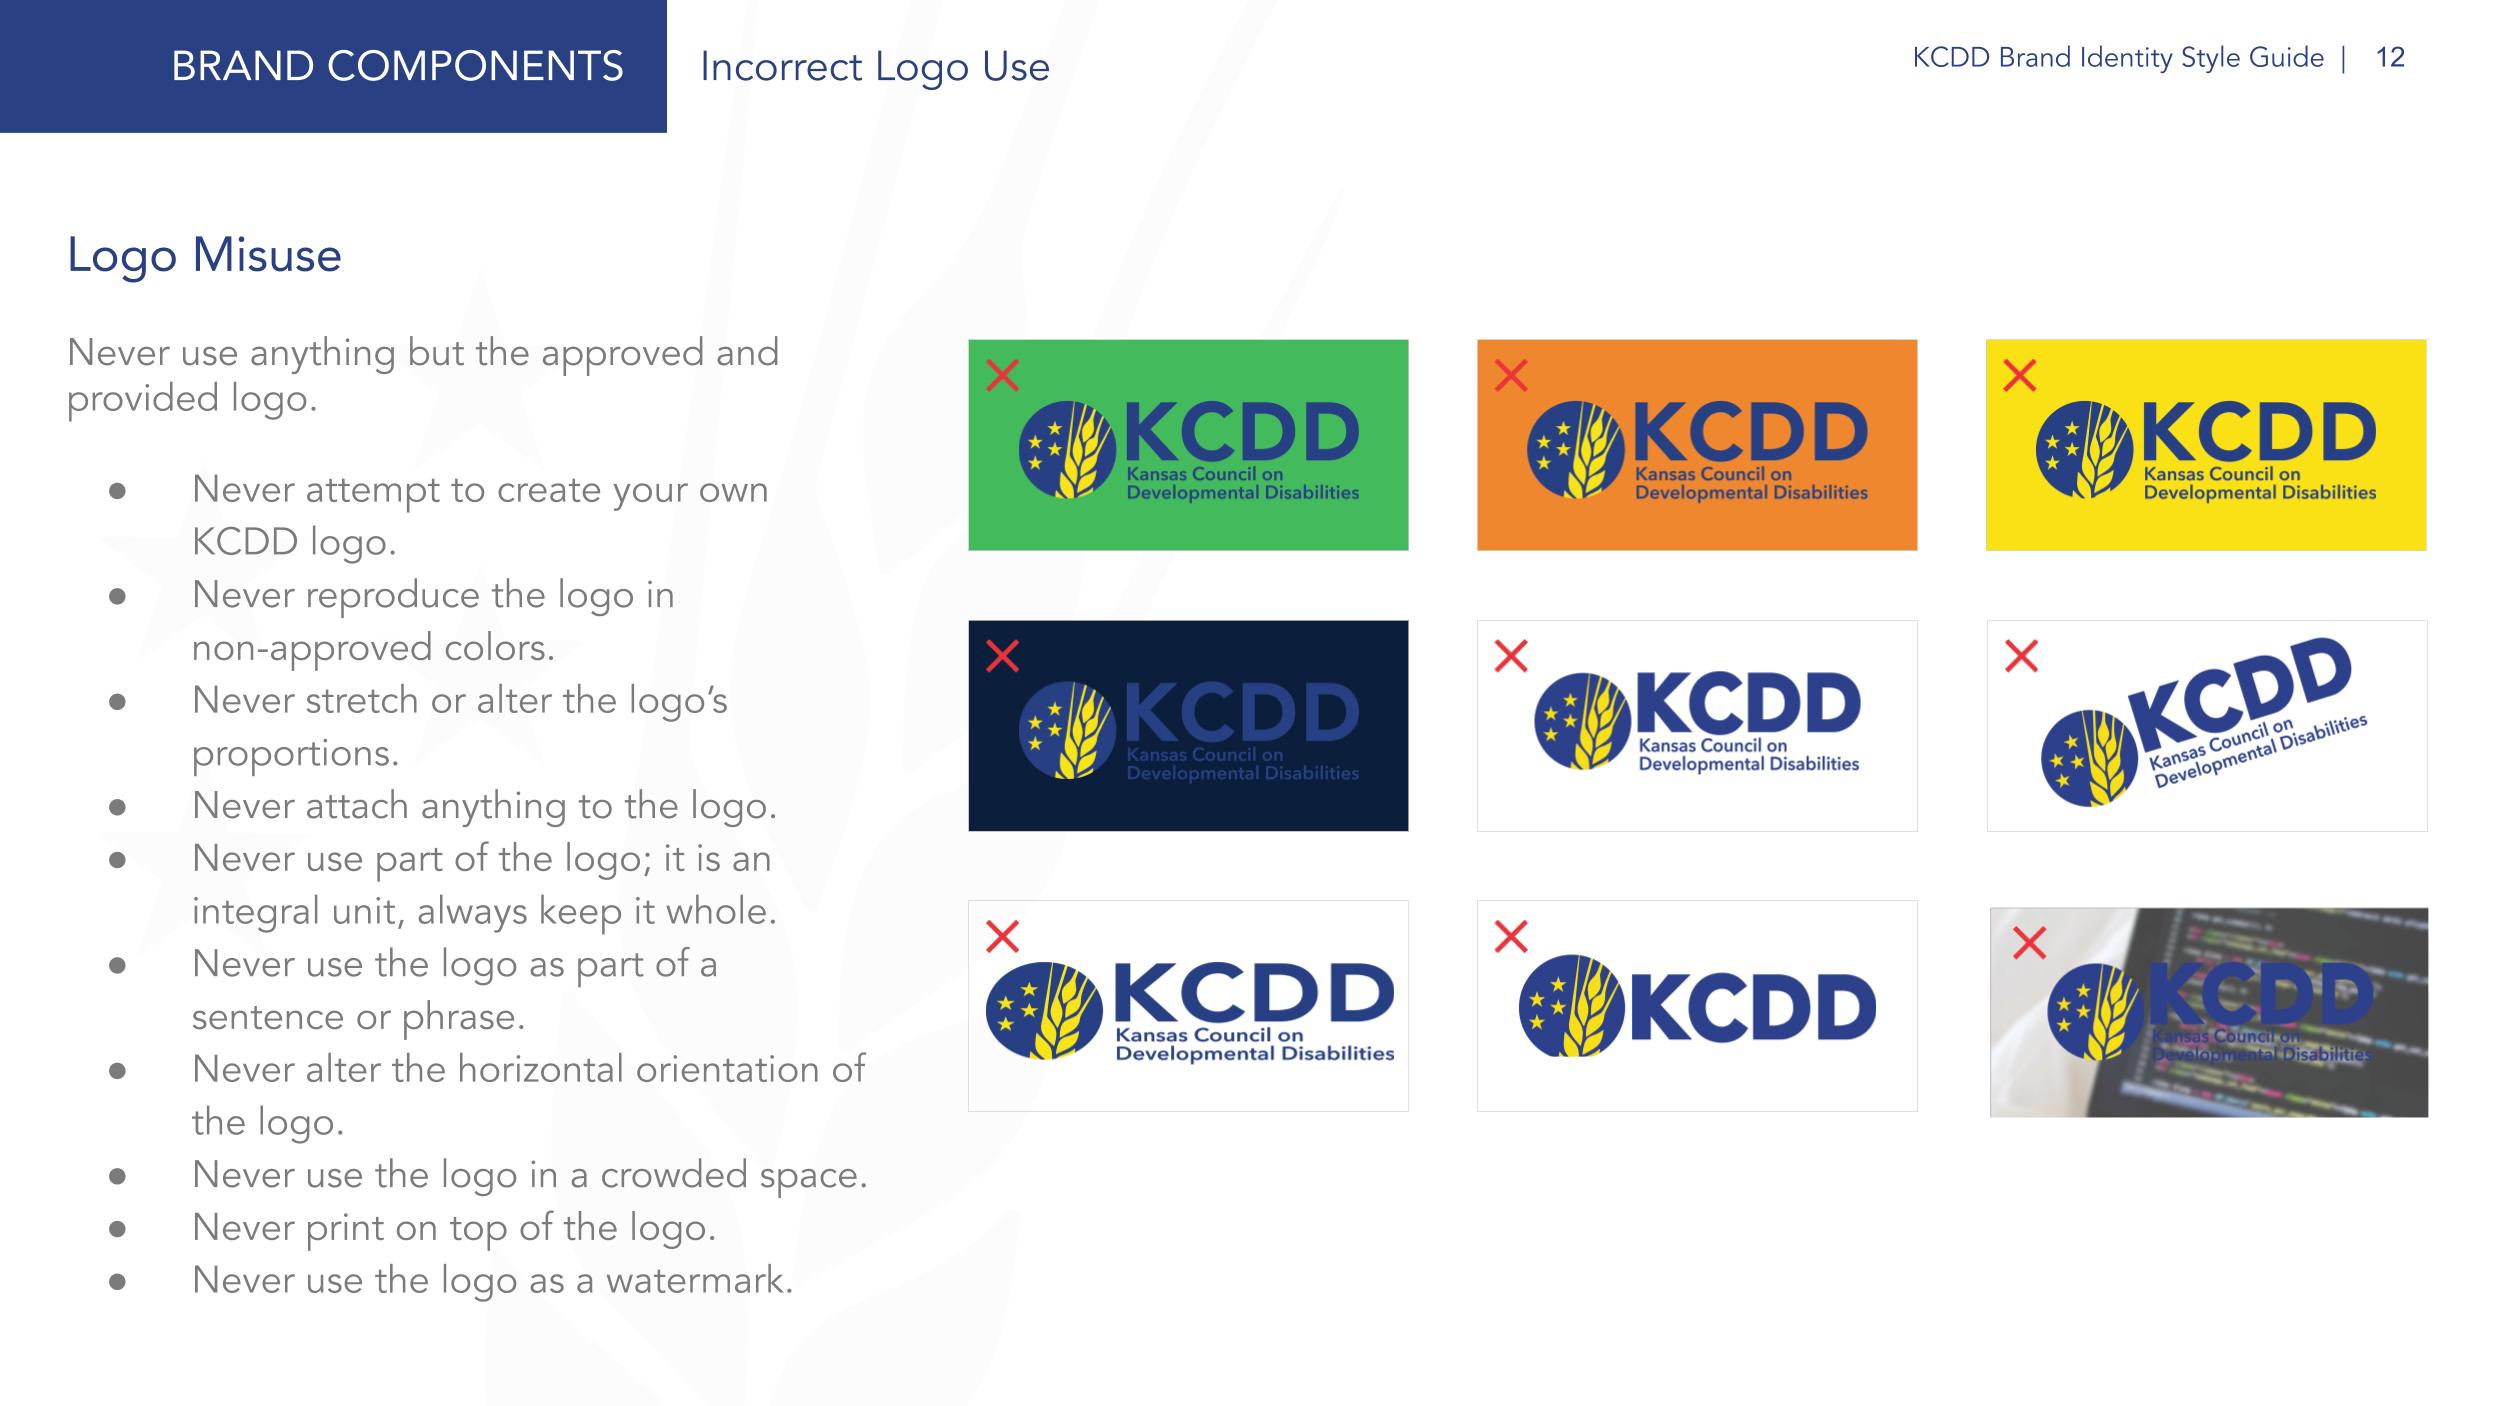 KCDD - KCDD Brand Identity Style Guide Page 12 - New Minds Group